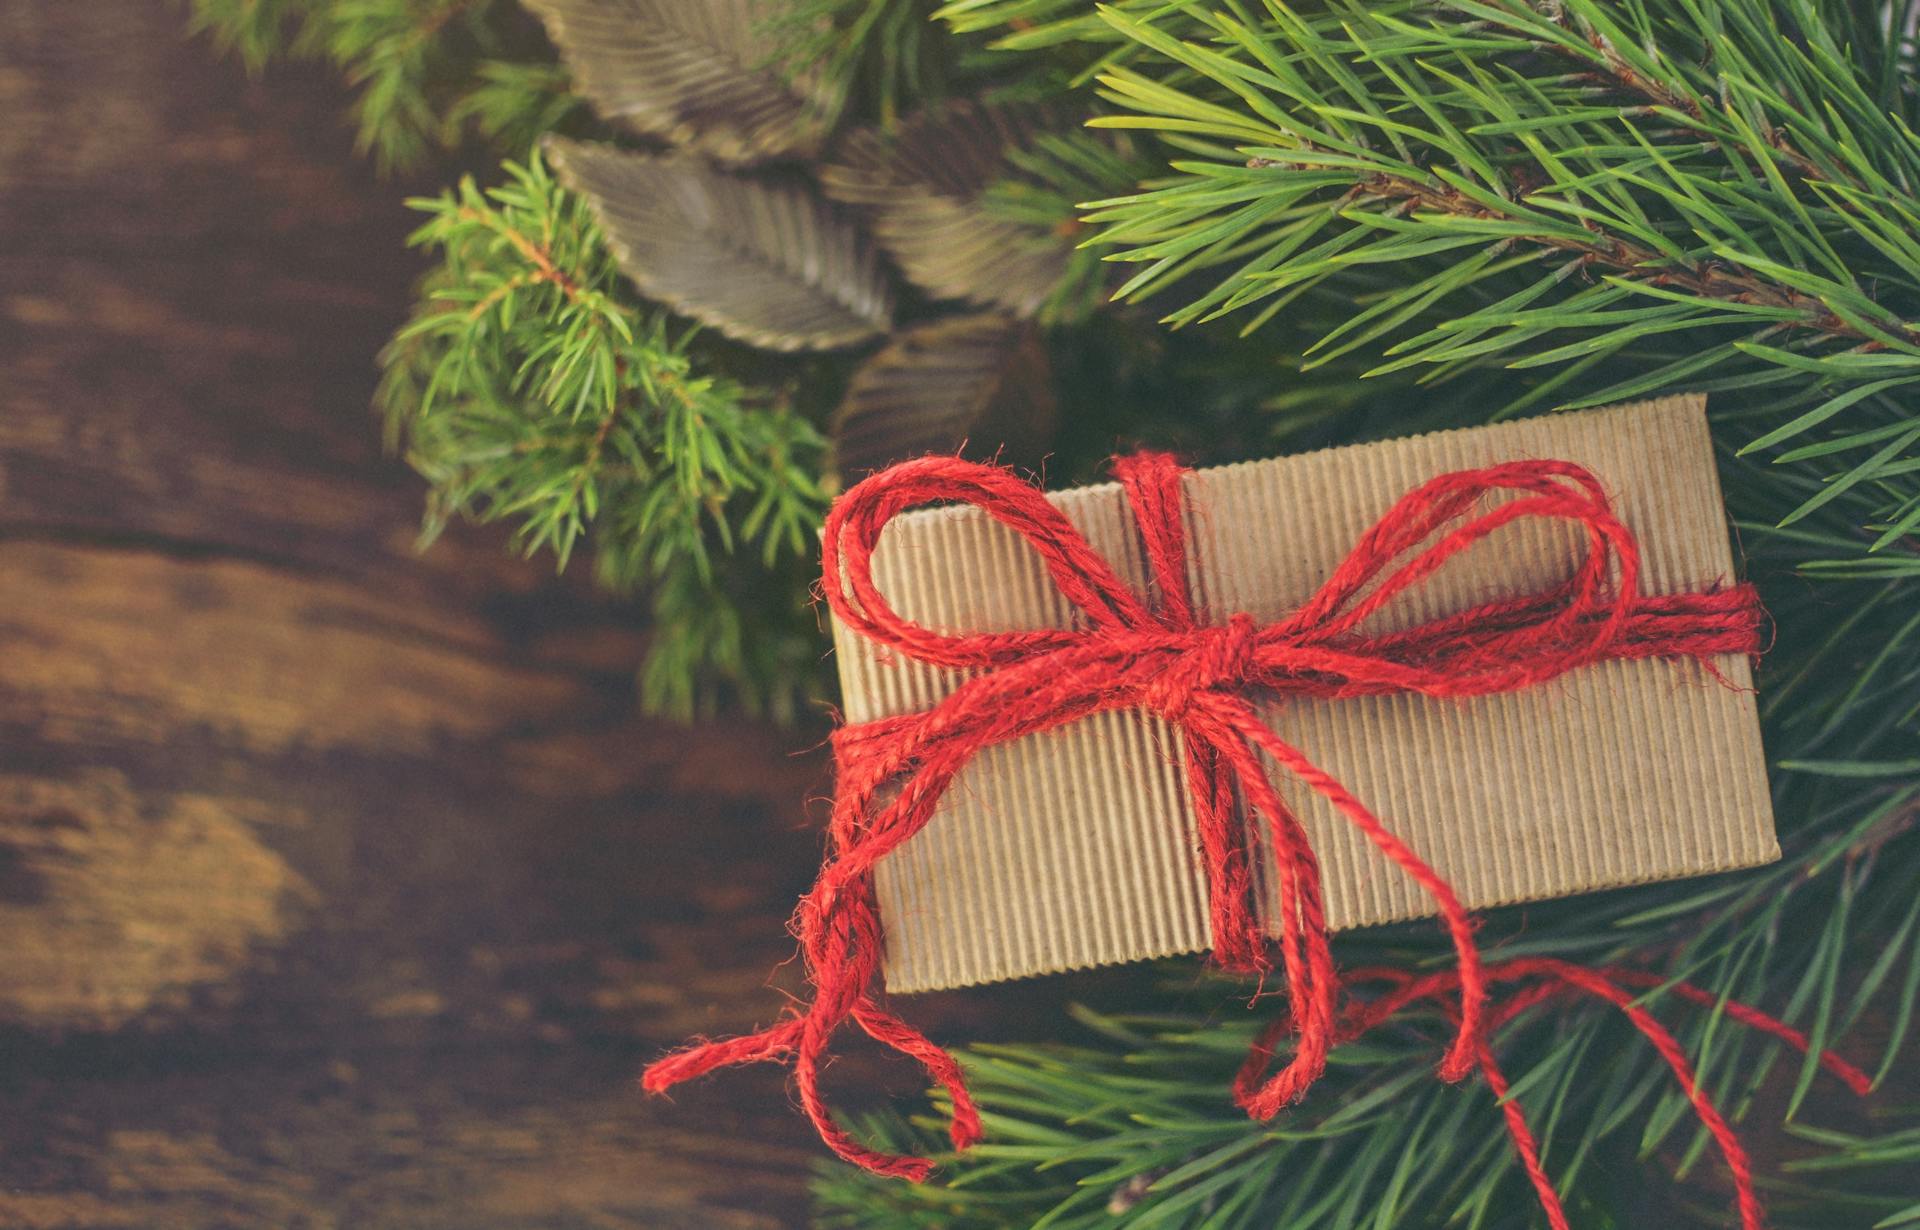 A brown gift box | Source: Pexels